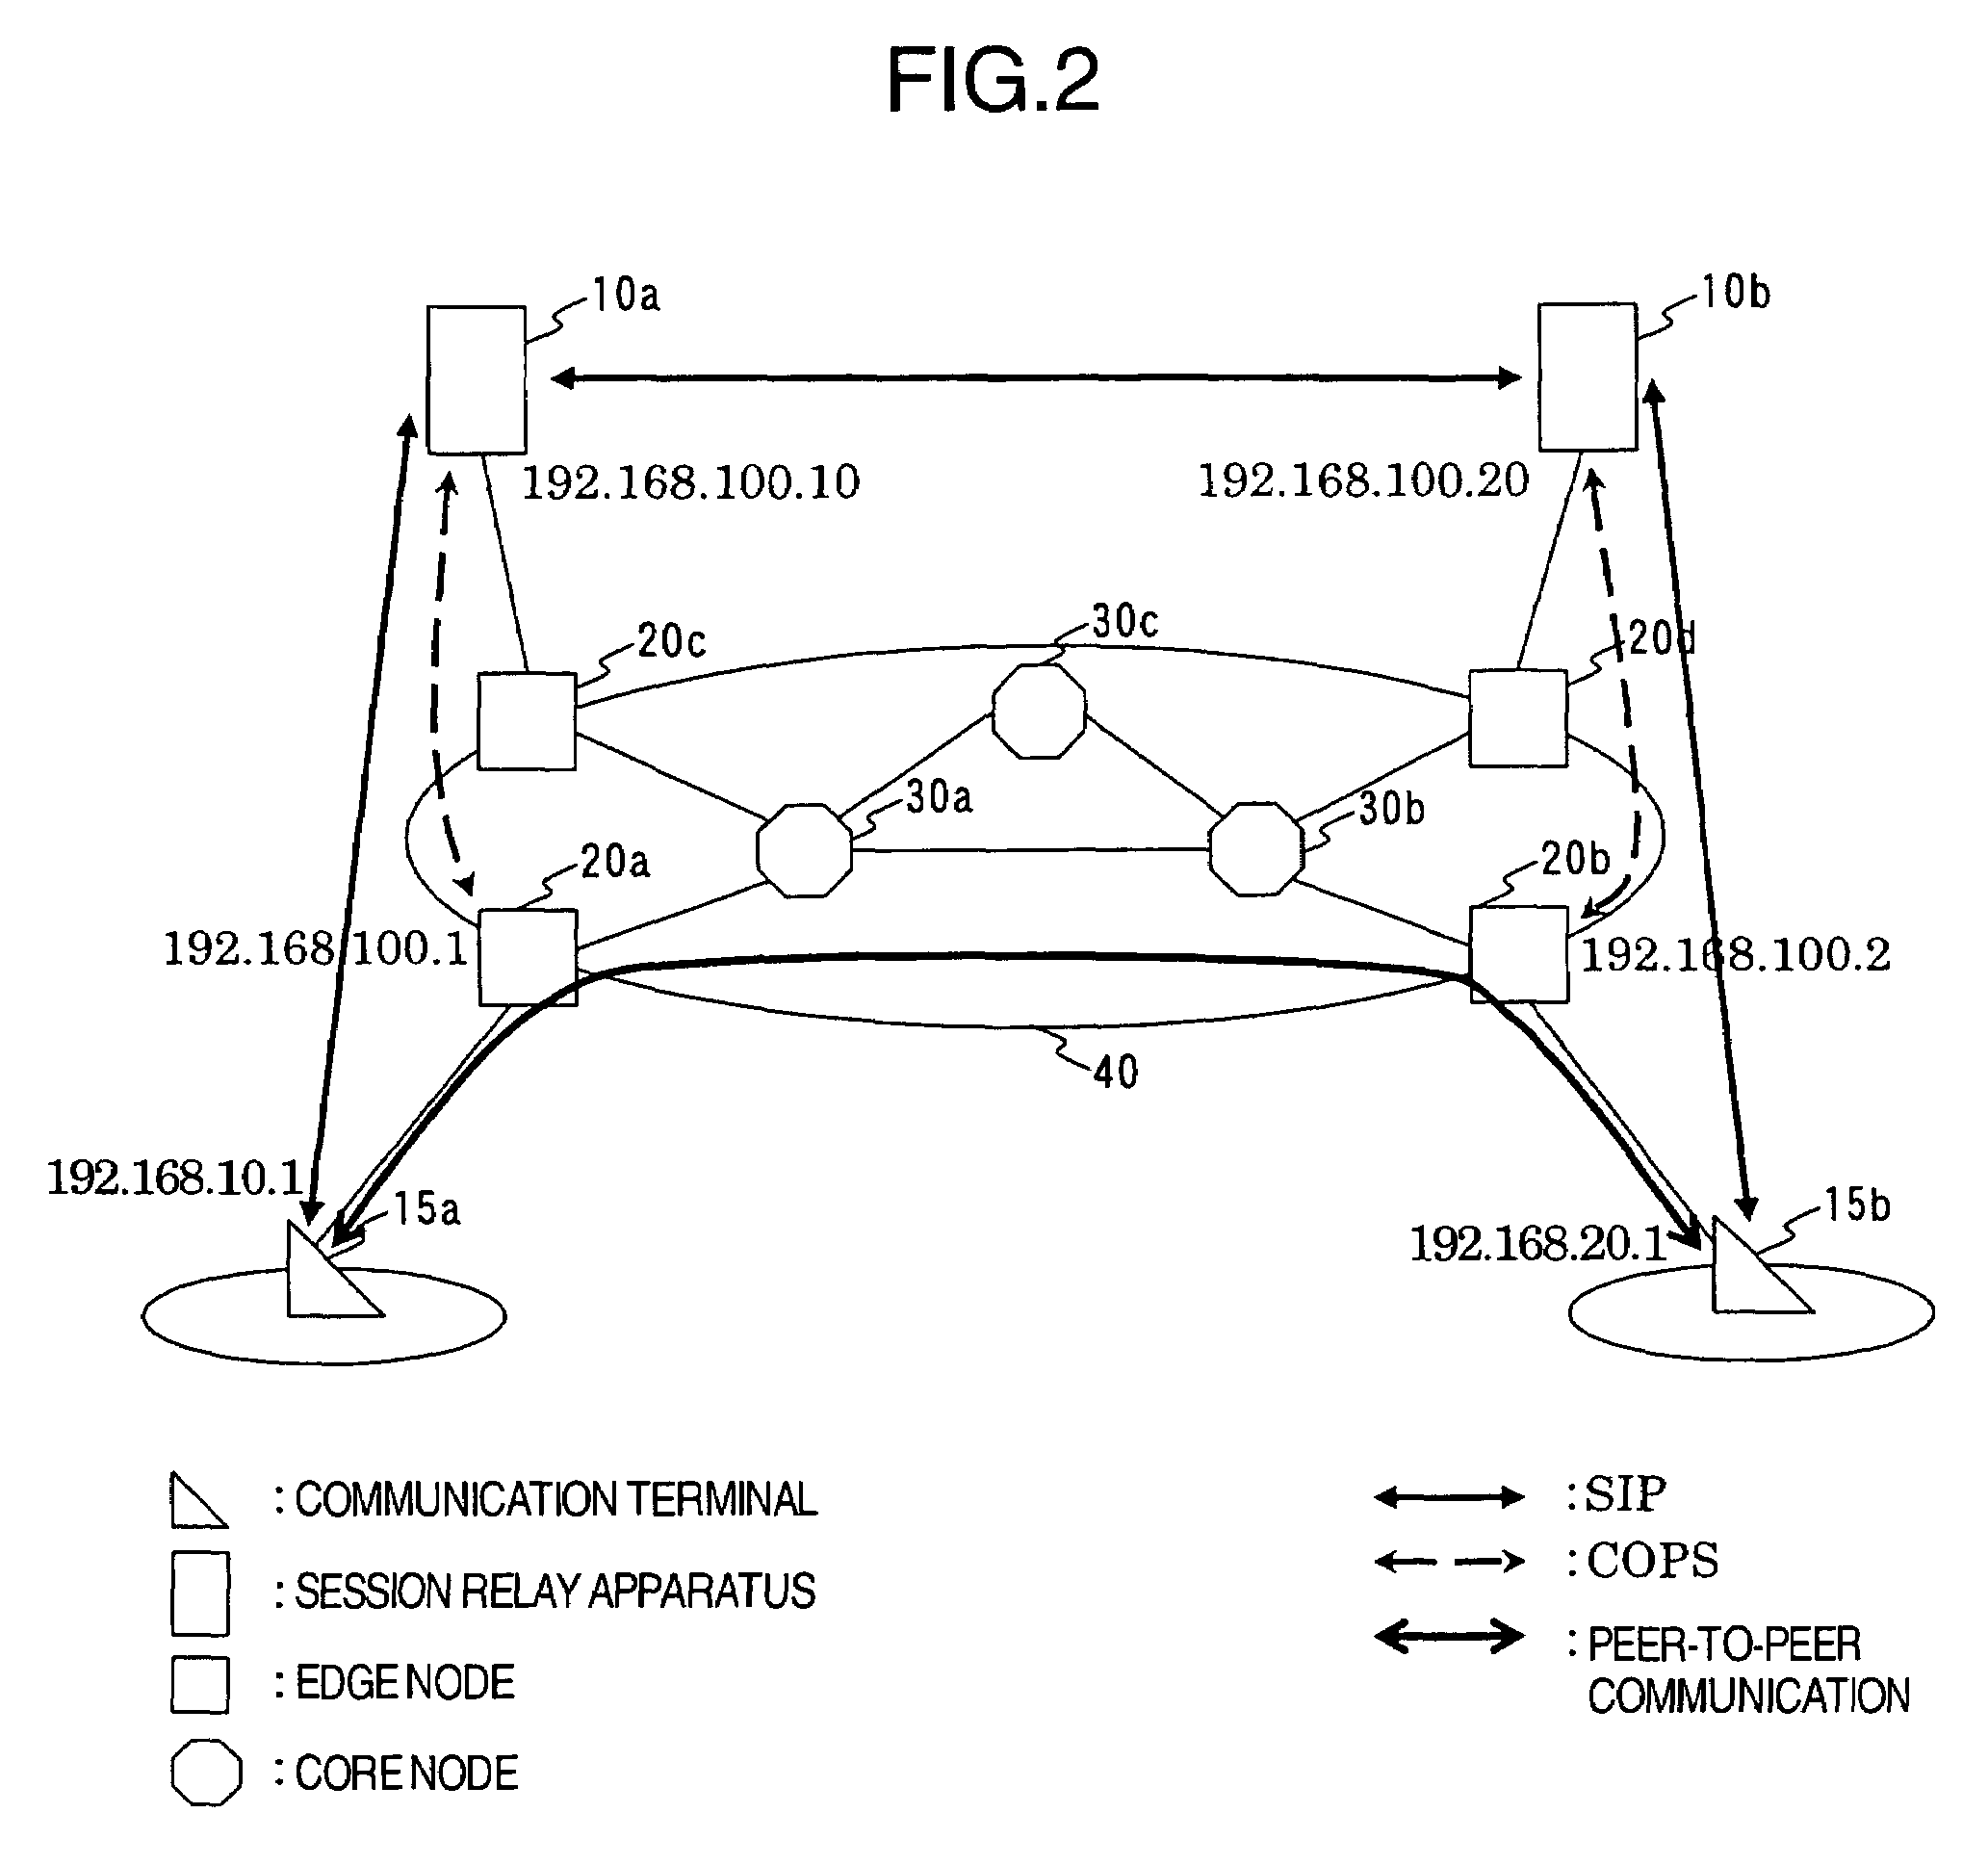 Policy settable peer-to-peer session apparatus